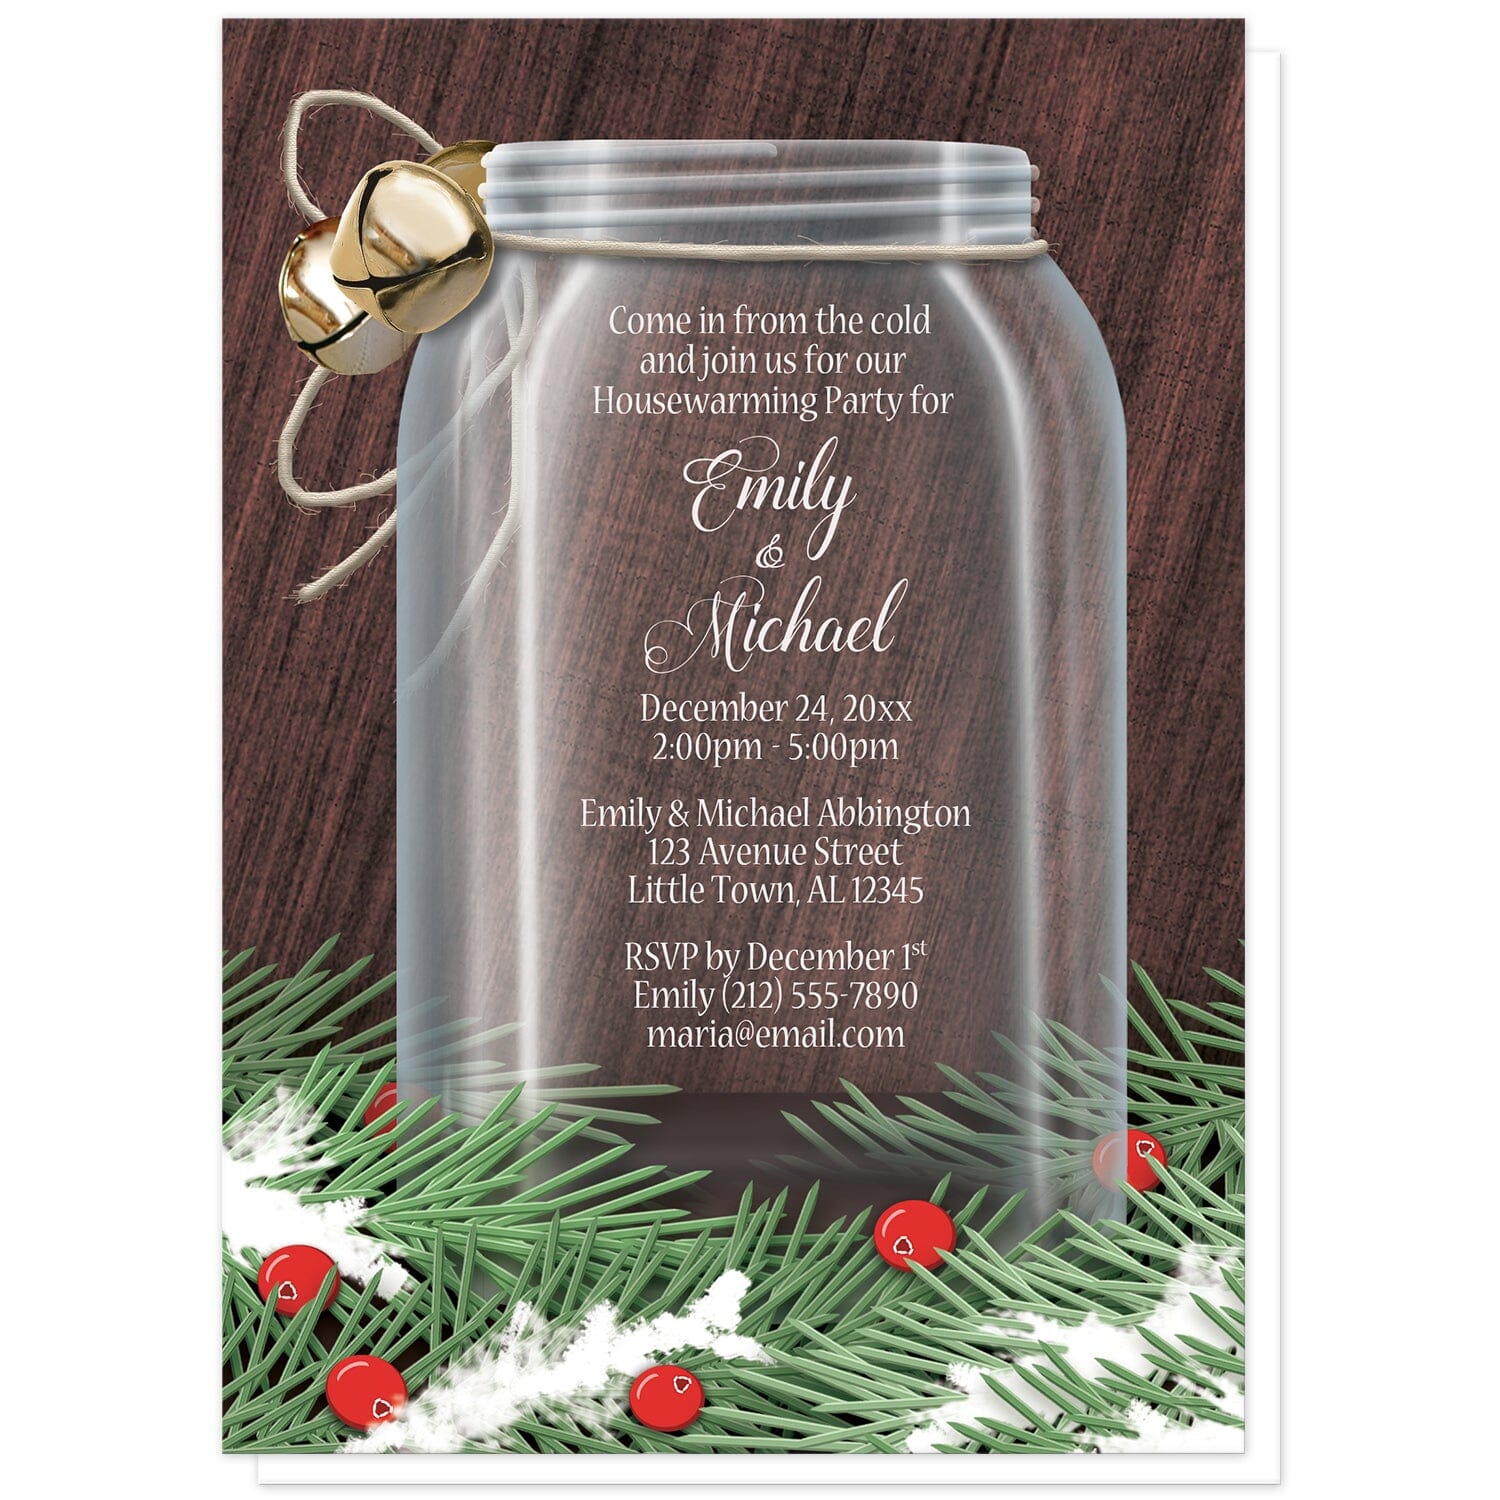 Winter Mason Jar Pine Boughs Housewarming Invitations at Artistically Invited. Rustic holiday-themed winter mason jar pine boughs housewarming invitations designed with a glass mason jar illustration with twine and jingle bells tied around the top of the jar and pine boughs and cranberries along the bottom over a dark wood design. Your personalized housewarming celebration details are custom printed in white over the mason jar area of the design.